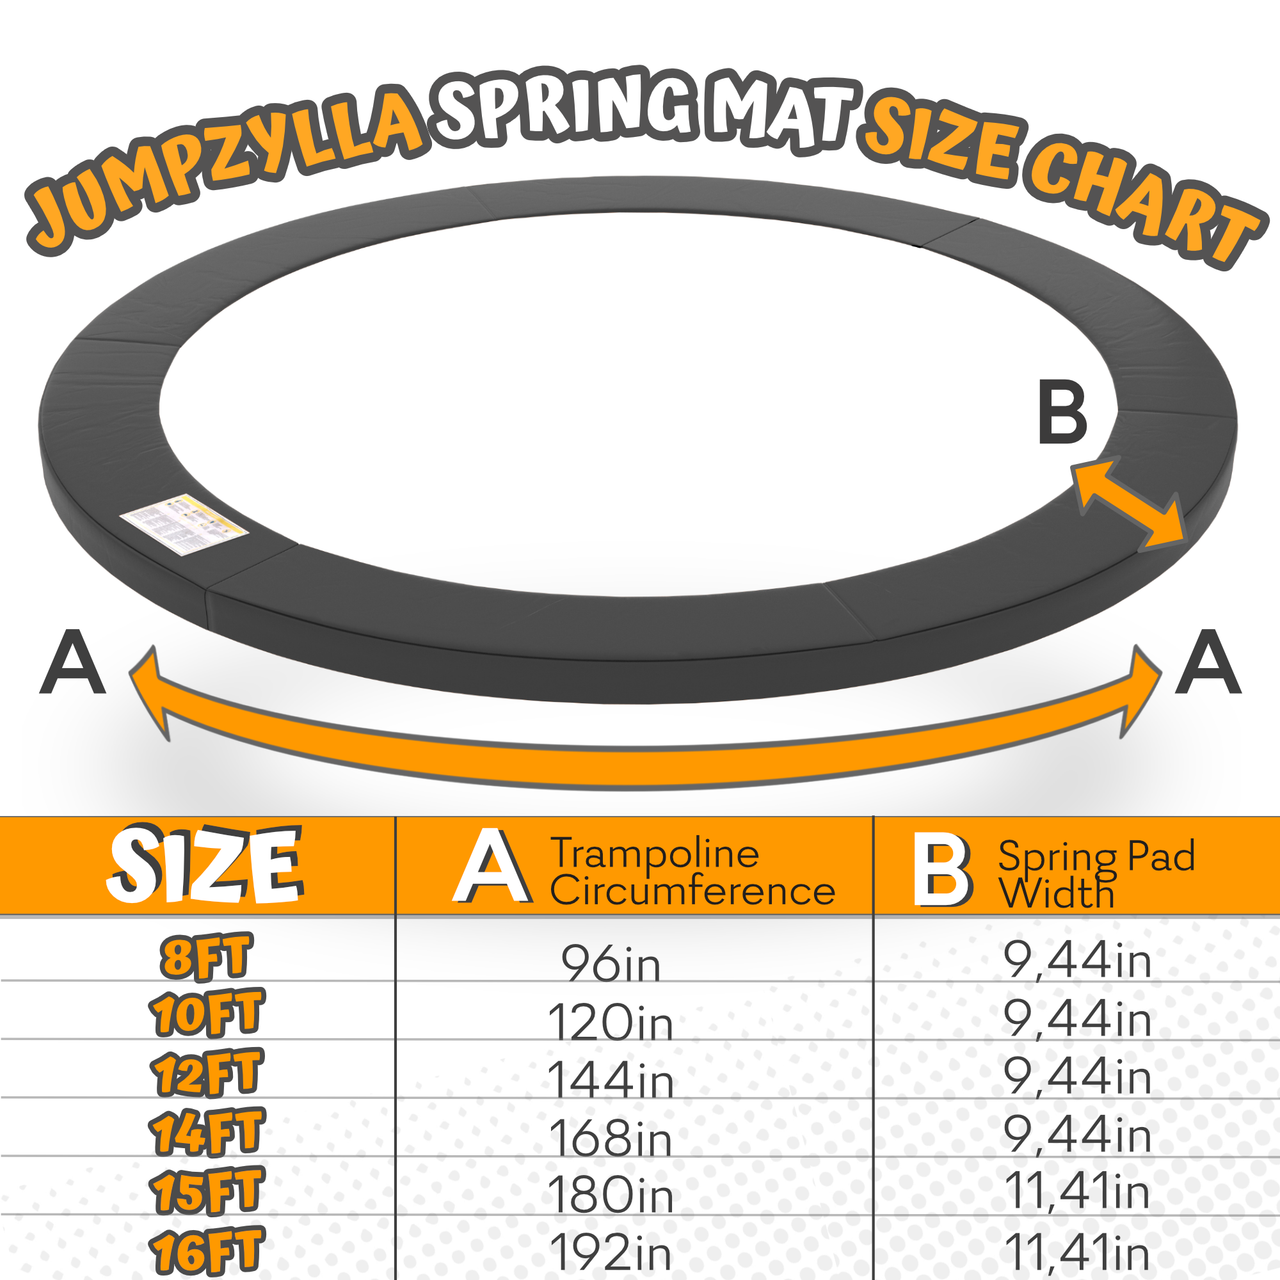 [NEW] Jumpzylla Double Sided Spring Cover Pads for 16FT Trampolines